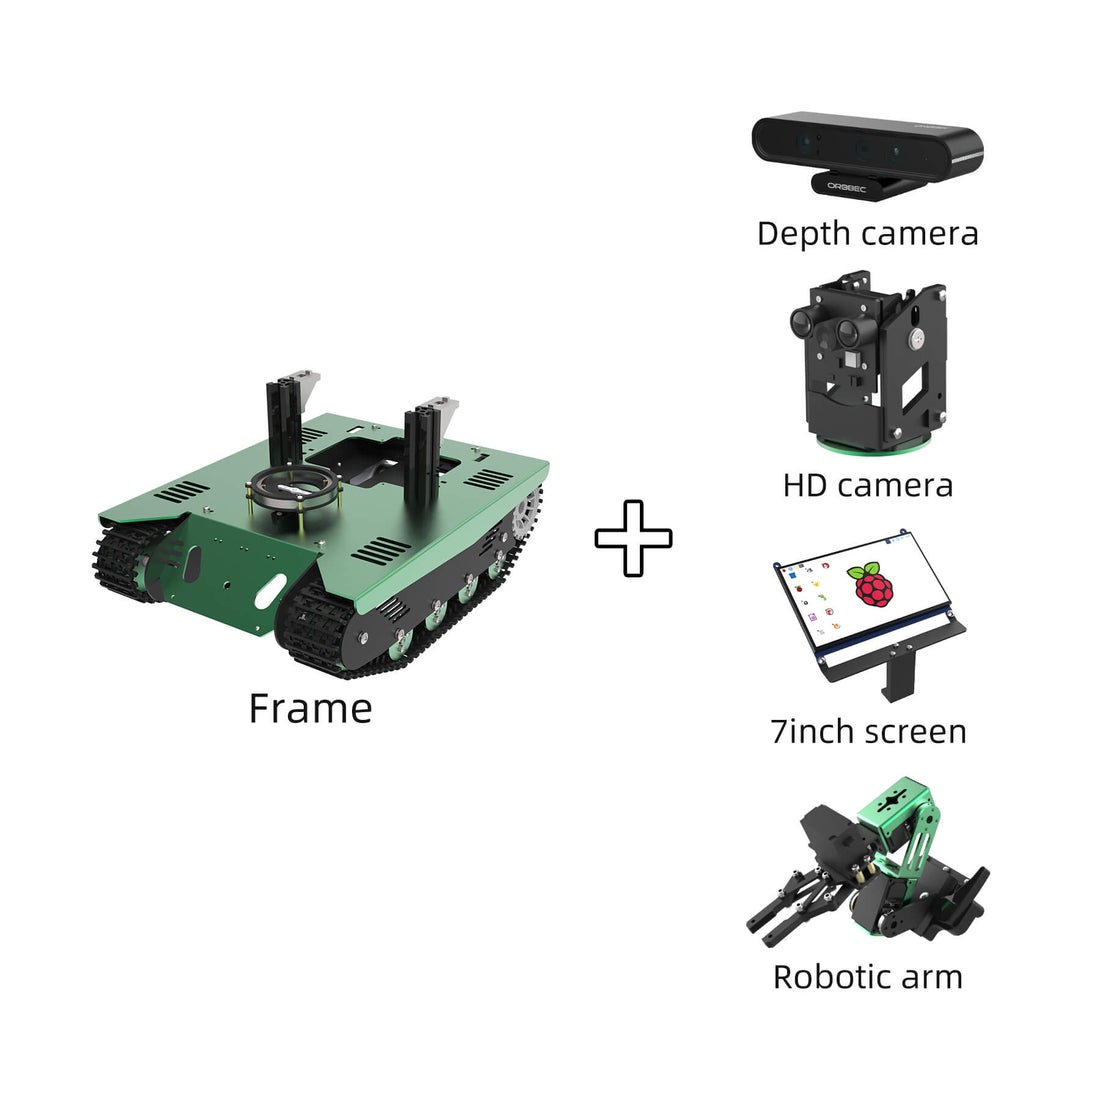 Yahboom ROS Transbot Robot with Lidar Depth camera support MoveIt 3D mapping for Raspberry Pi